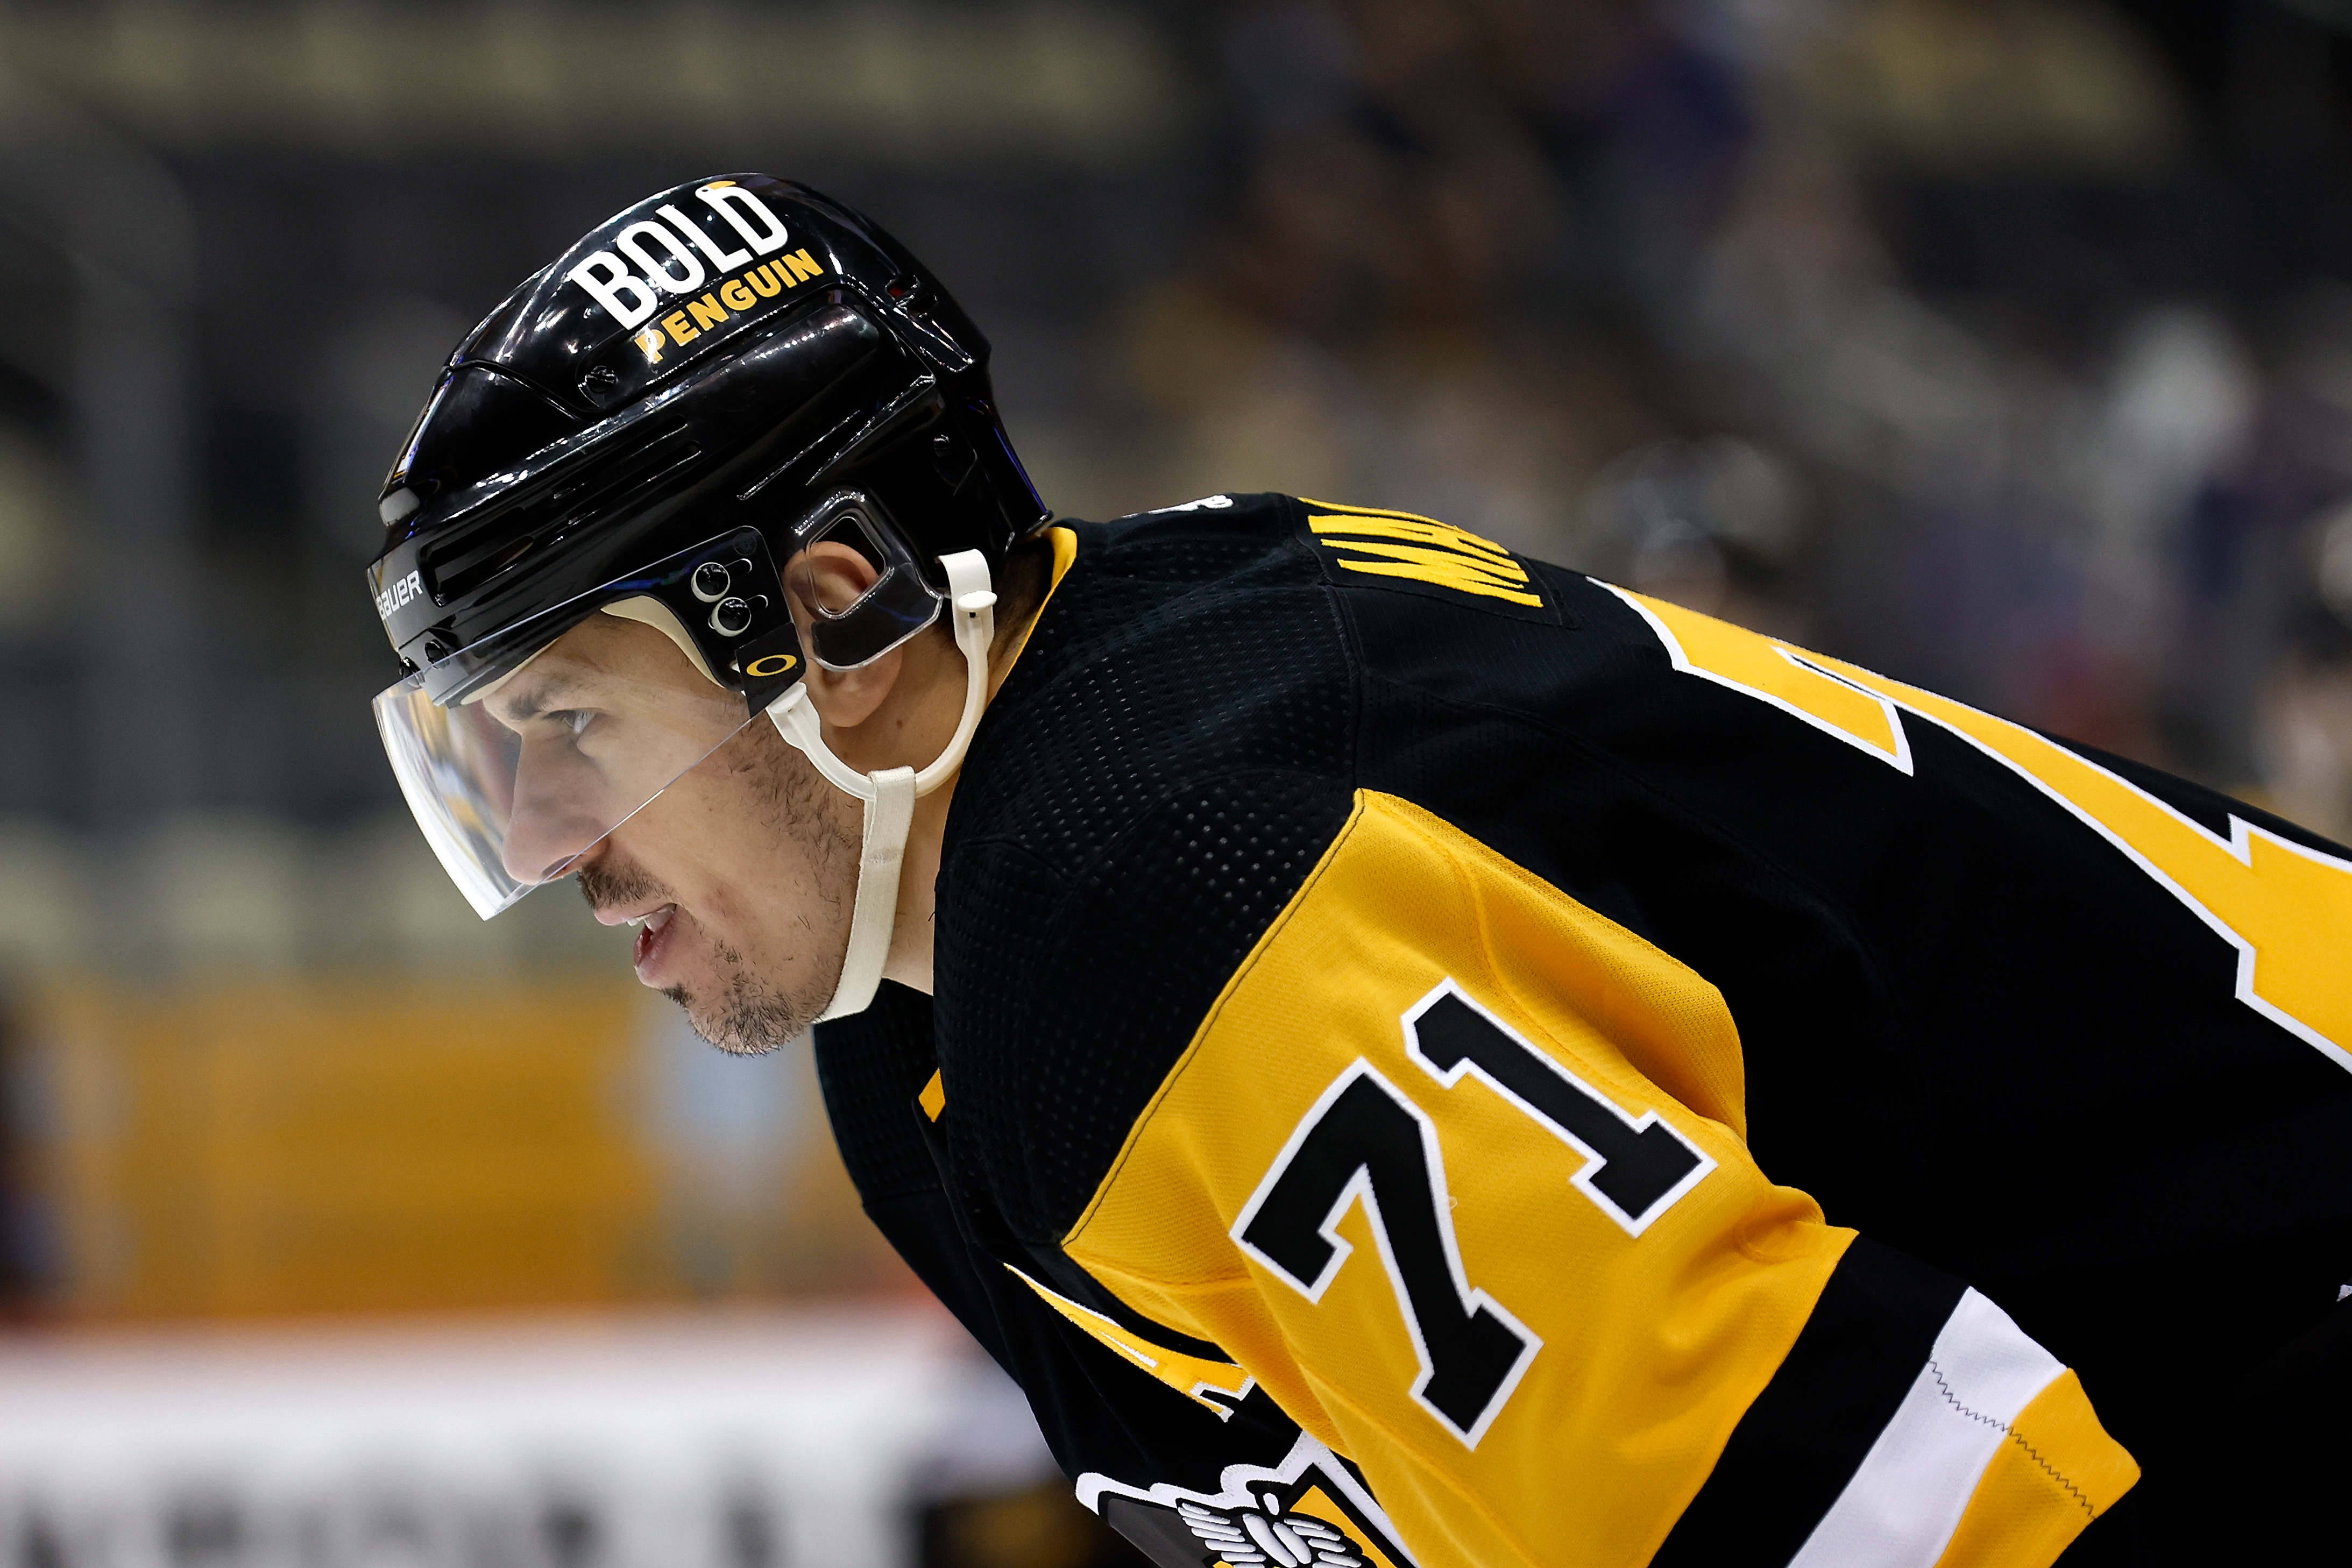 Watch: The Many Sides of Evgeni Malkin